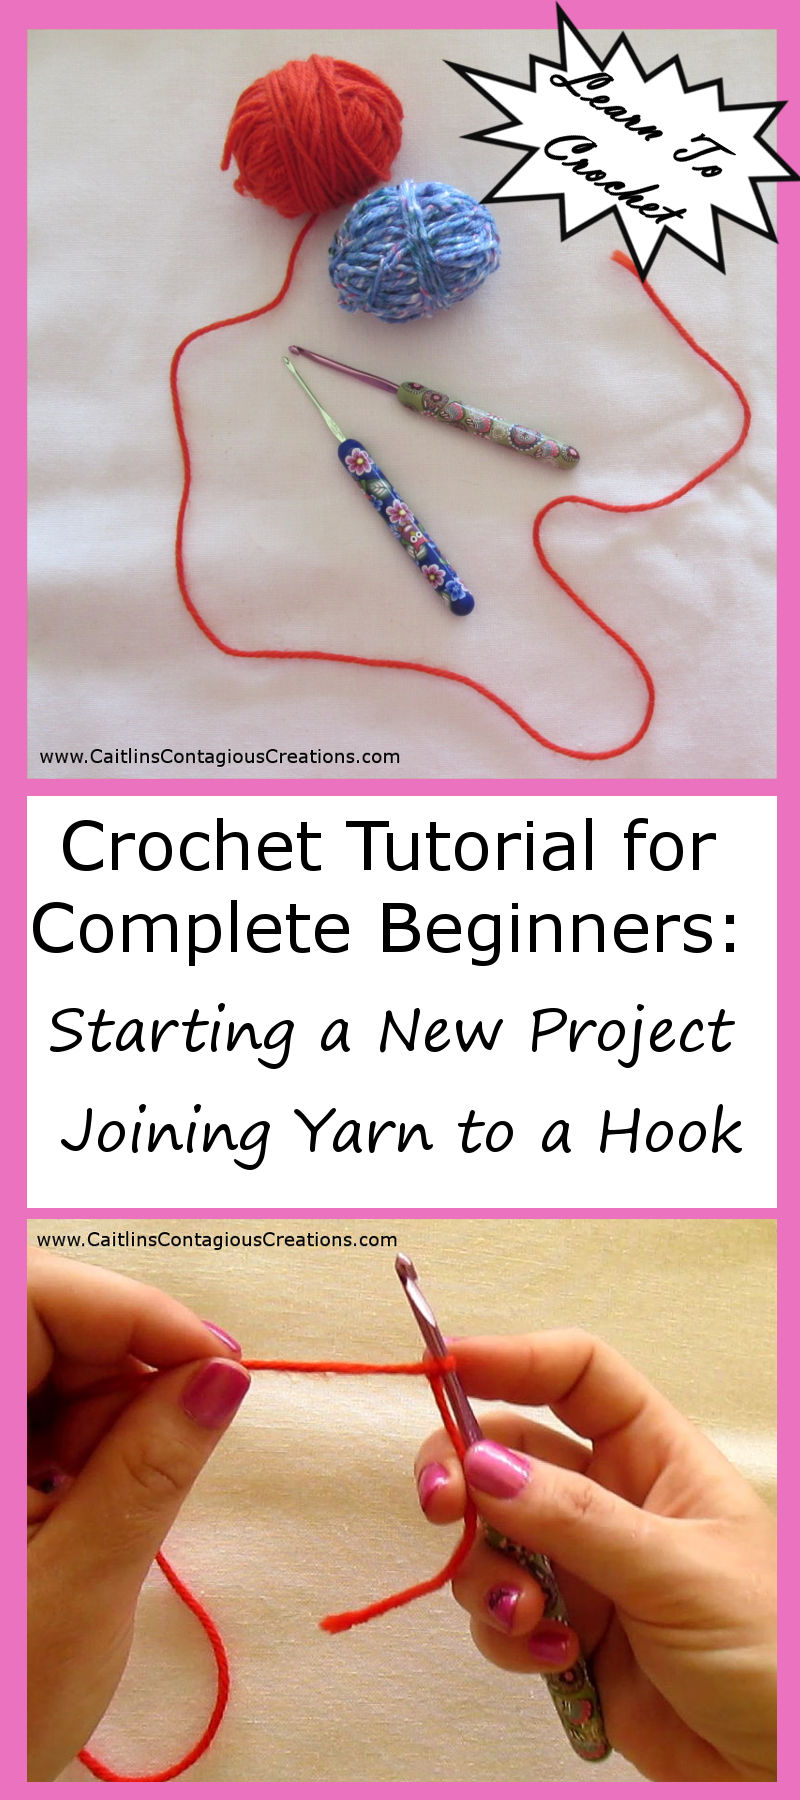 Learn To Crochet! A tutorial for complete beginners. Learn to attach yarn to a crochet hook to start a new crochet project. A step by step guide with photos from Caitlin's Contagious Creations!